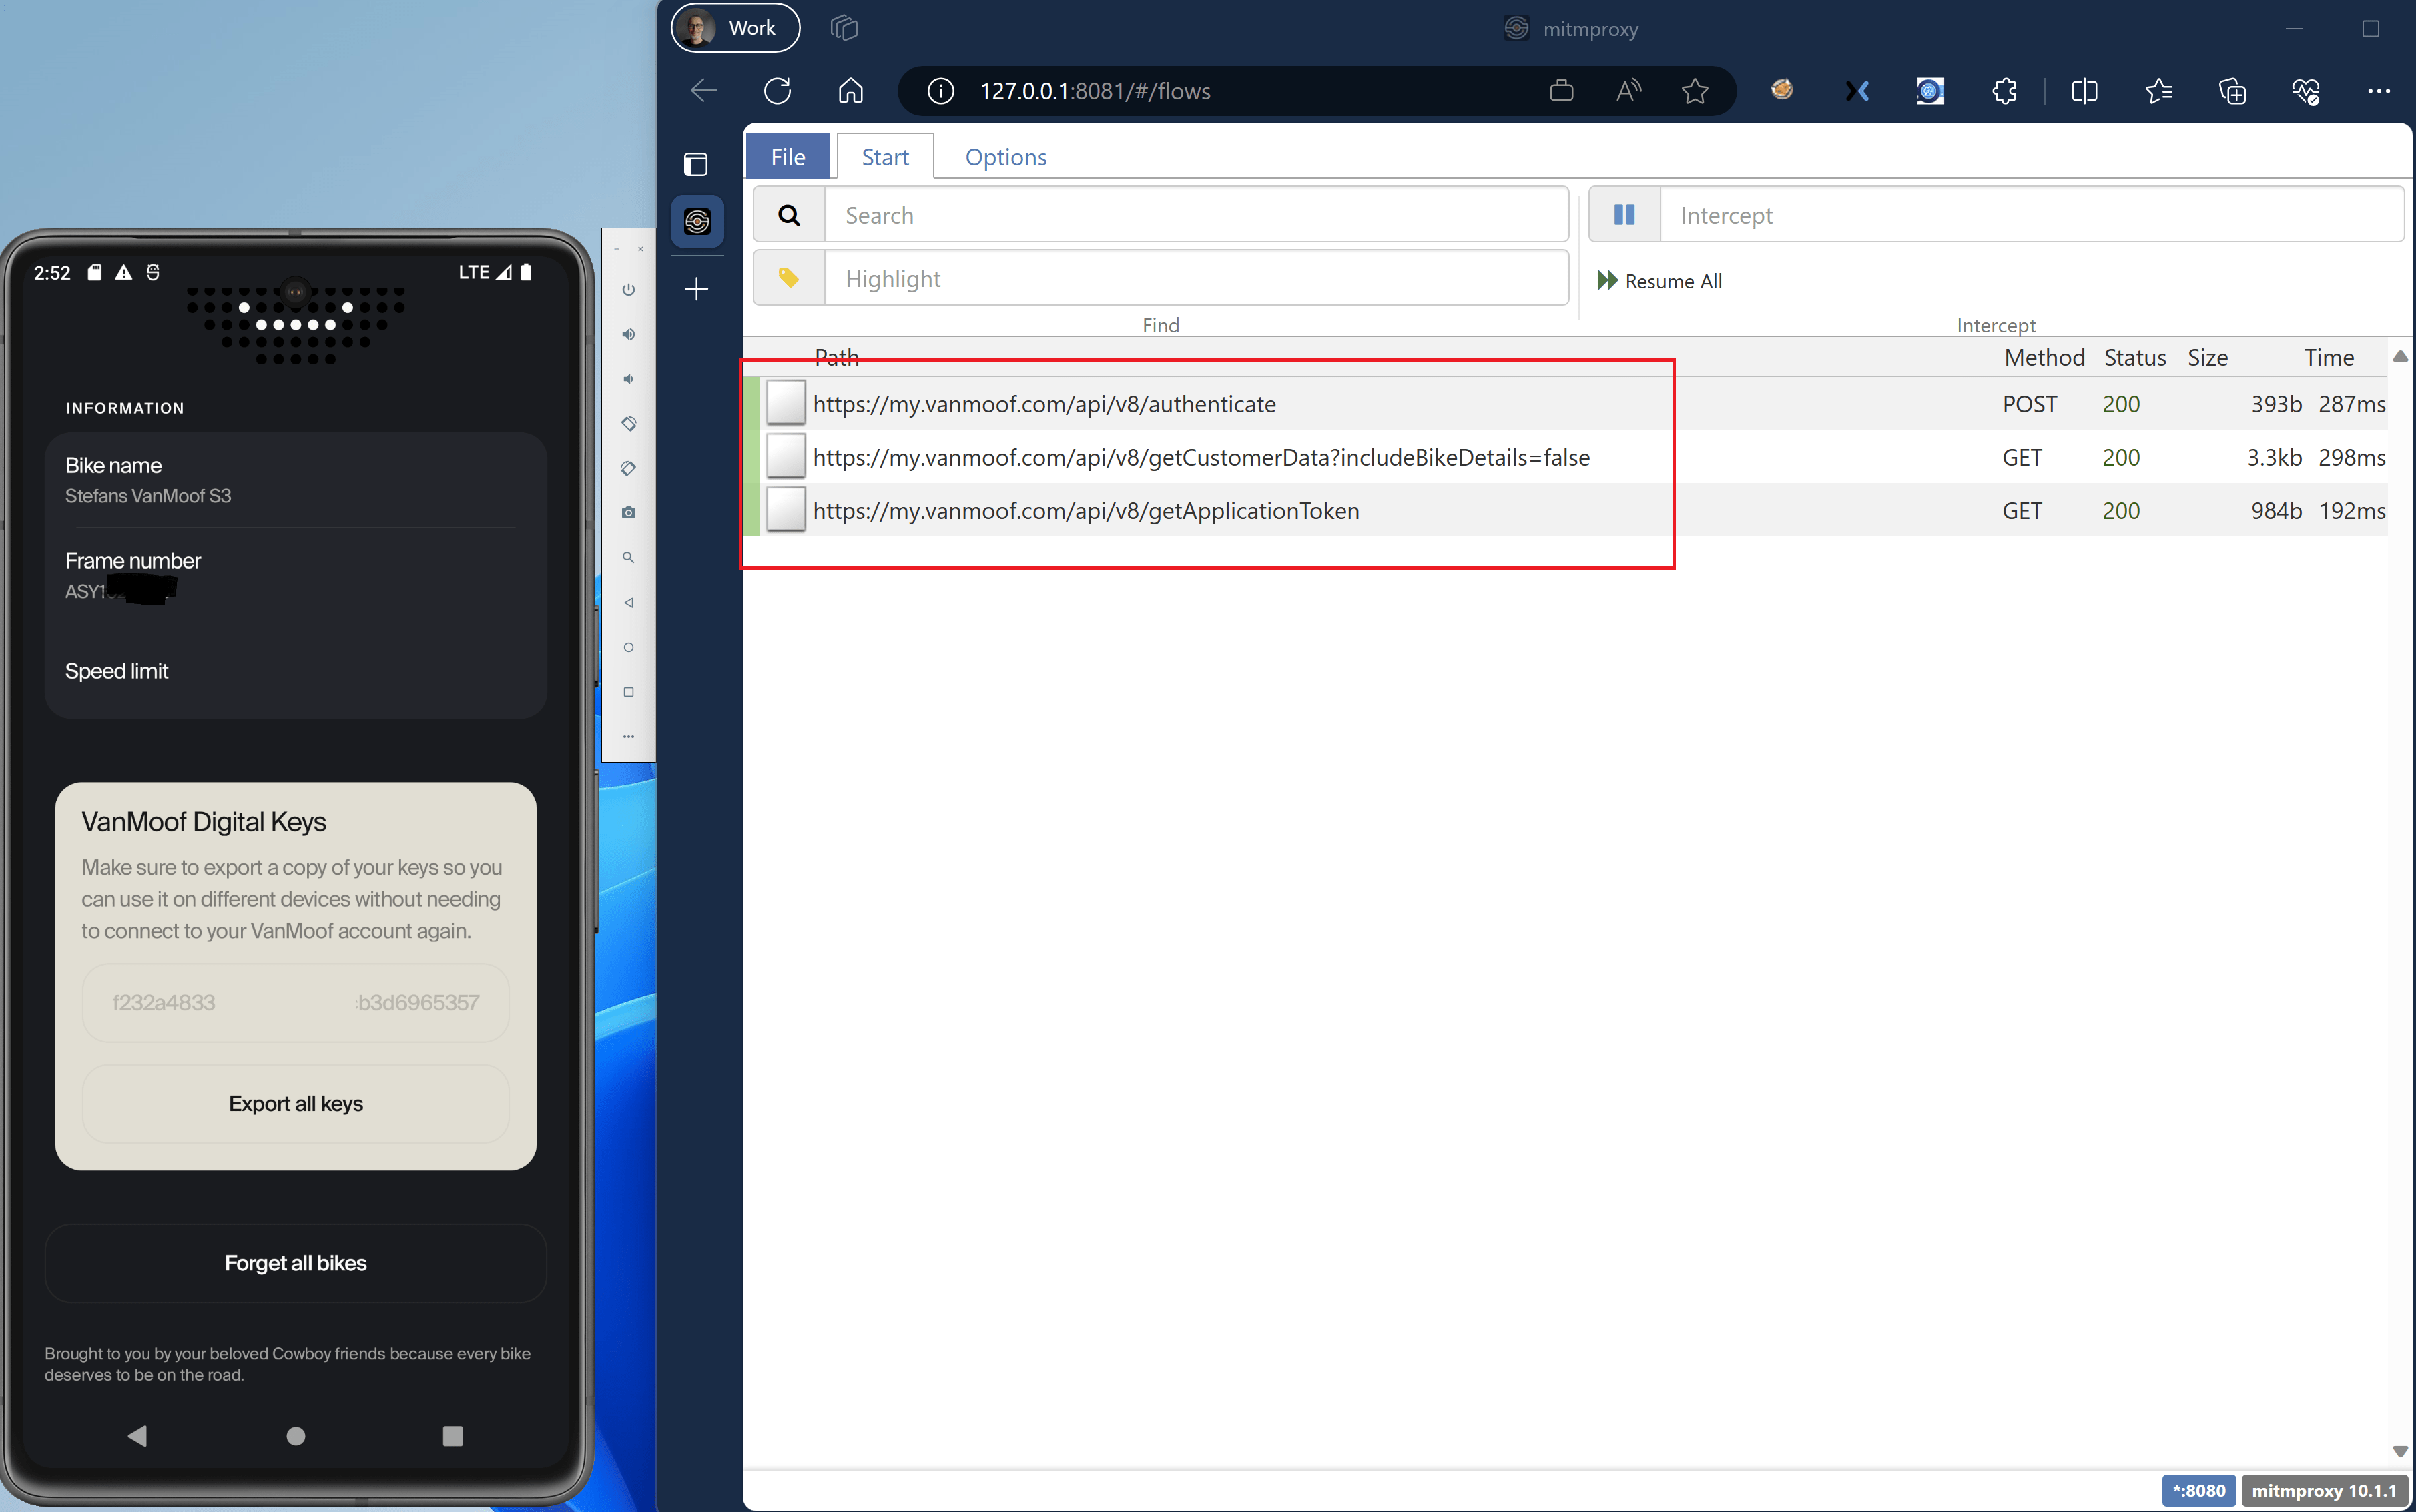 Screenshot of both the emulated Android Device running the Bikey Android App and the edge browser running the mitmproxy with the https calls being made via the mitmproxy